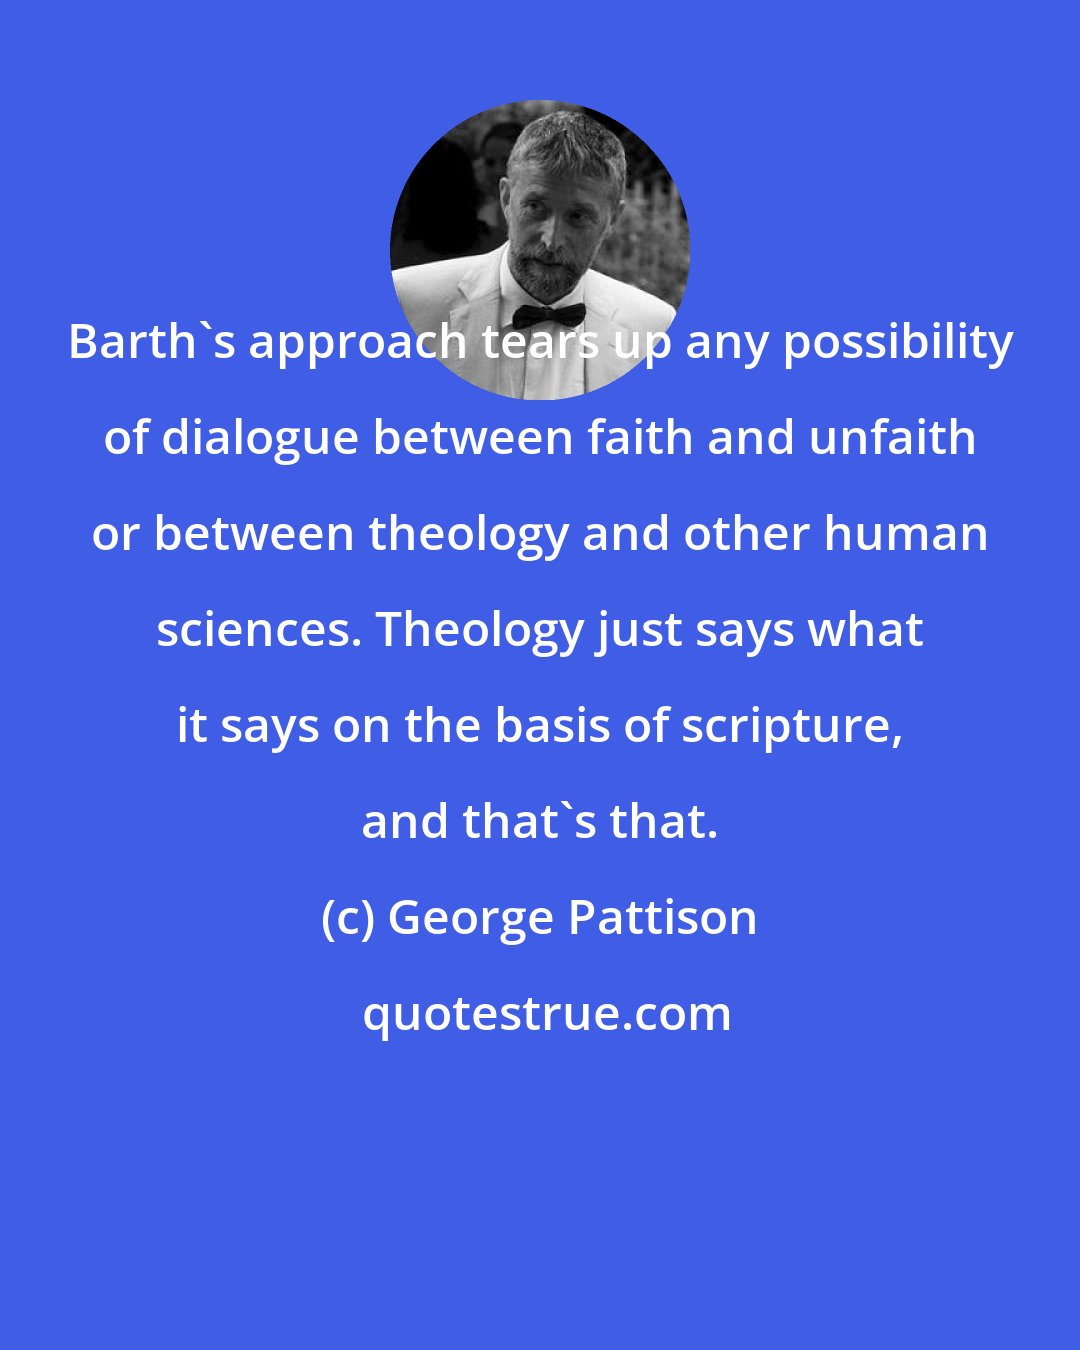 George Pattison: Barth's approach tears up any possibility of dialogue between faith and unfaith or between theology and other human sciences. Theology just says what it says on the basis of scripture, and that's that.